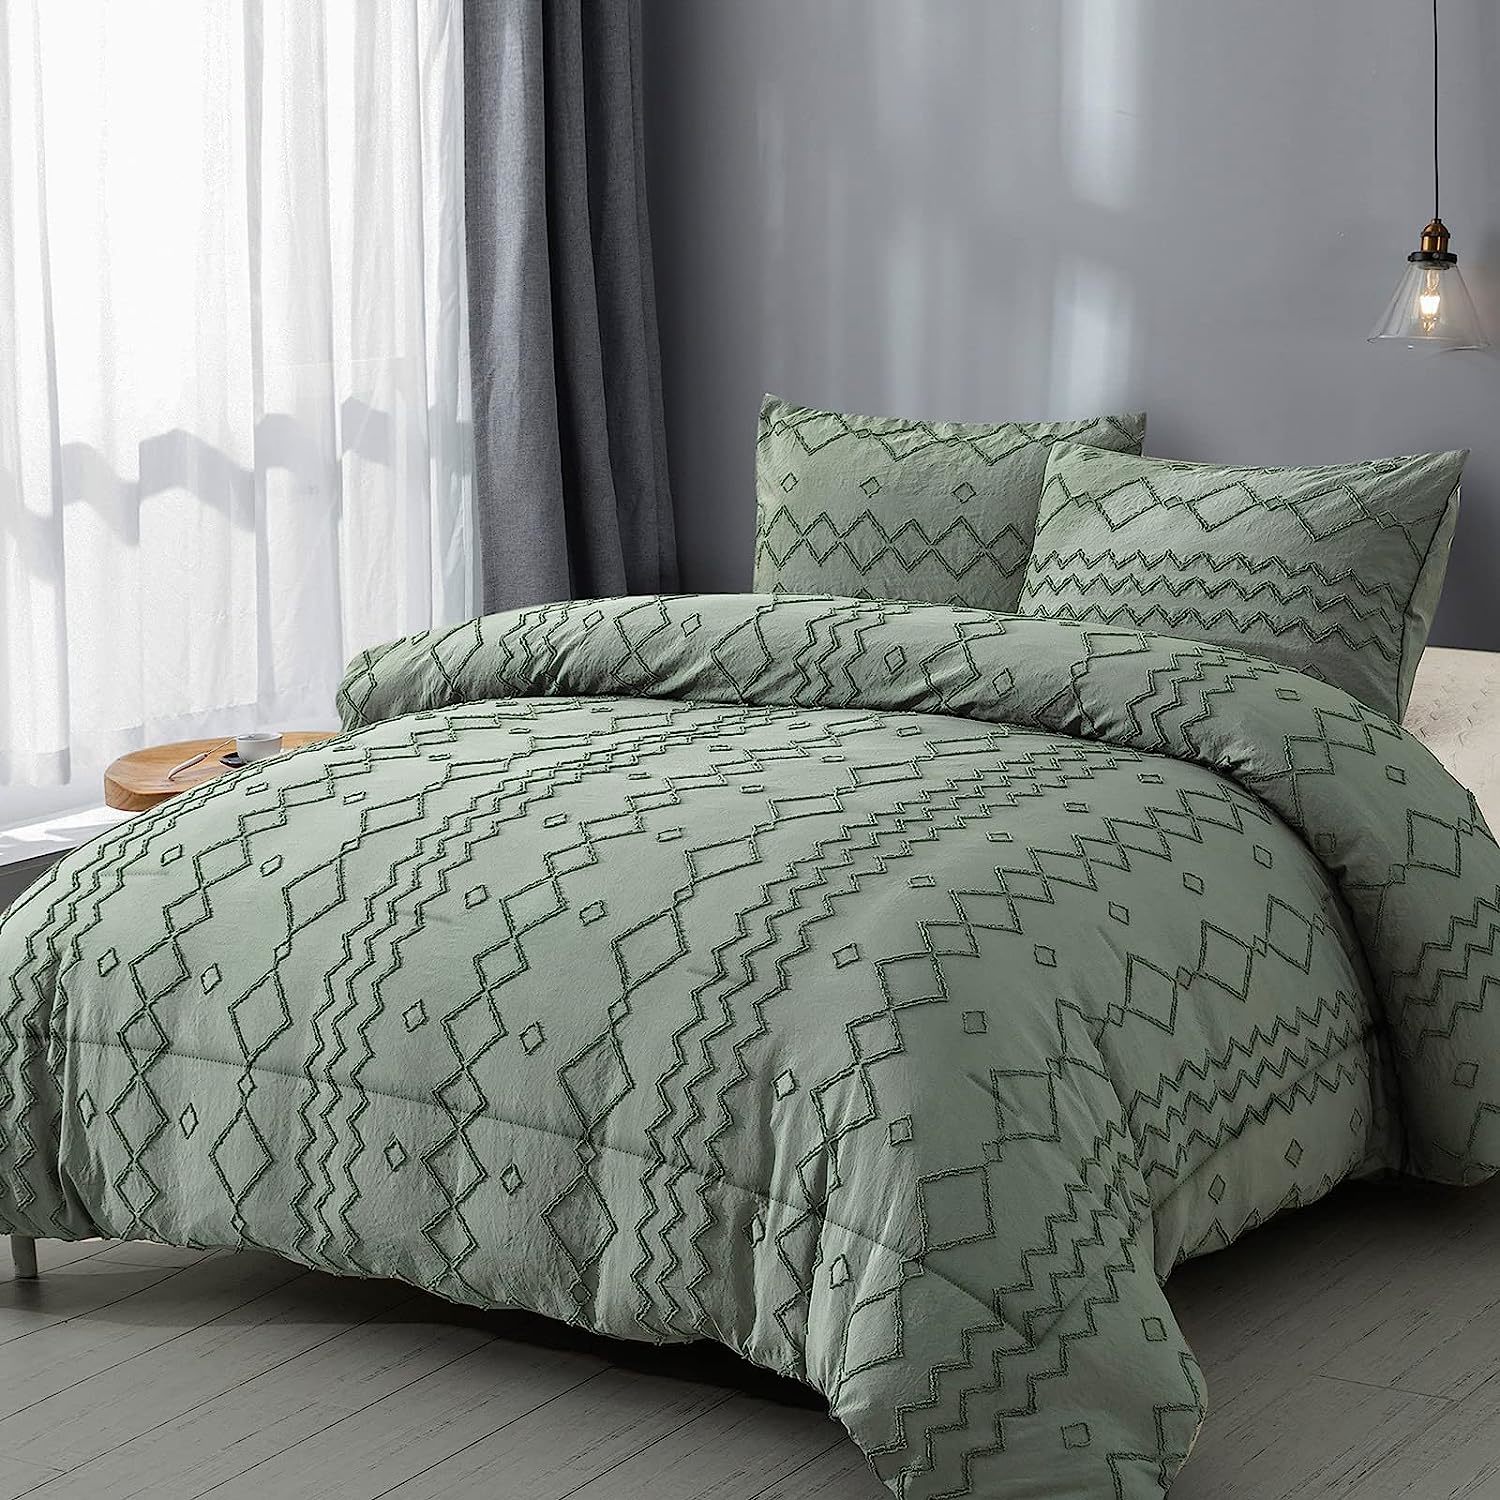 Green Tufted Comforter Set King Size (10290 Inches), Boho Shabby Chic Comforter - $59.93